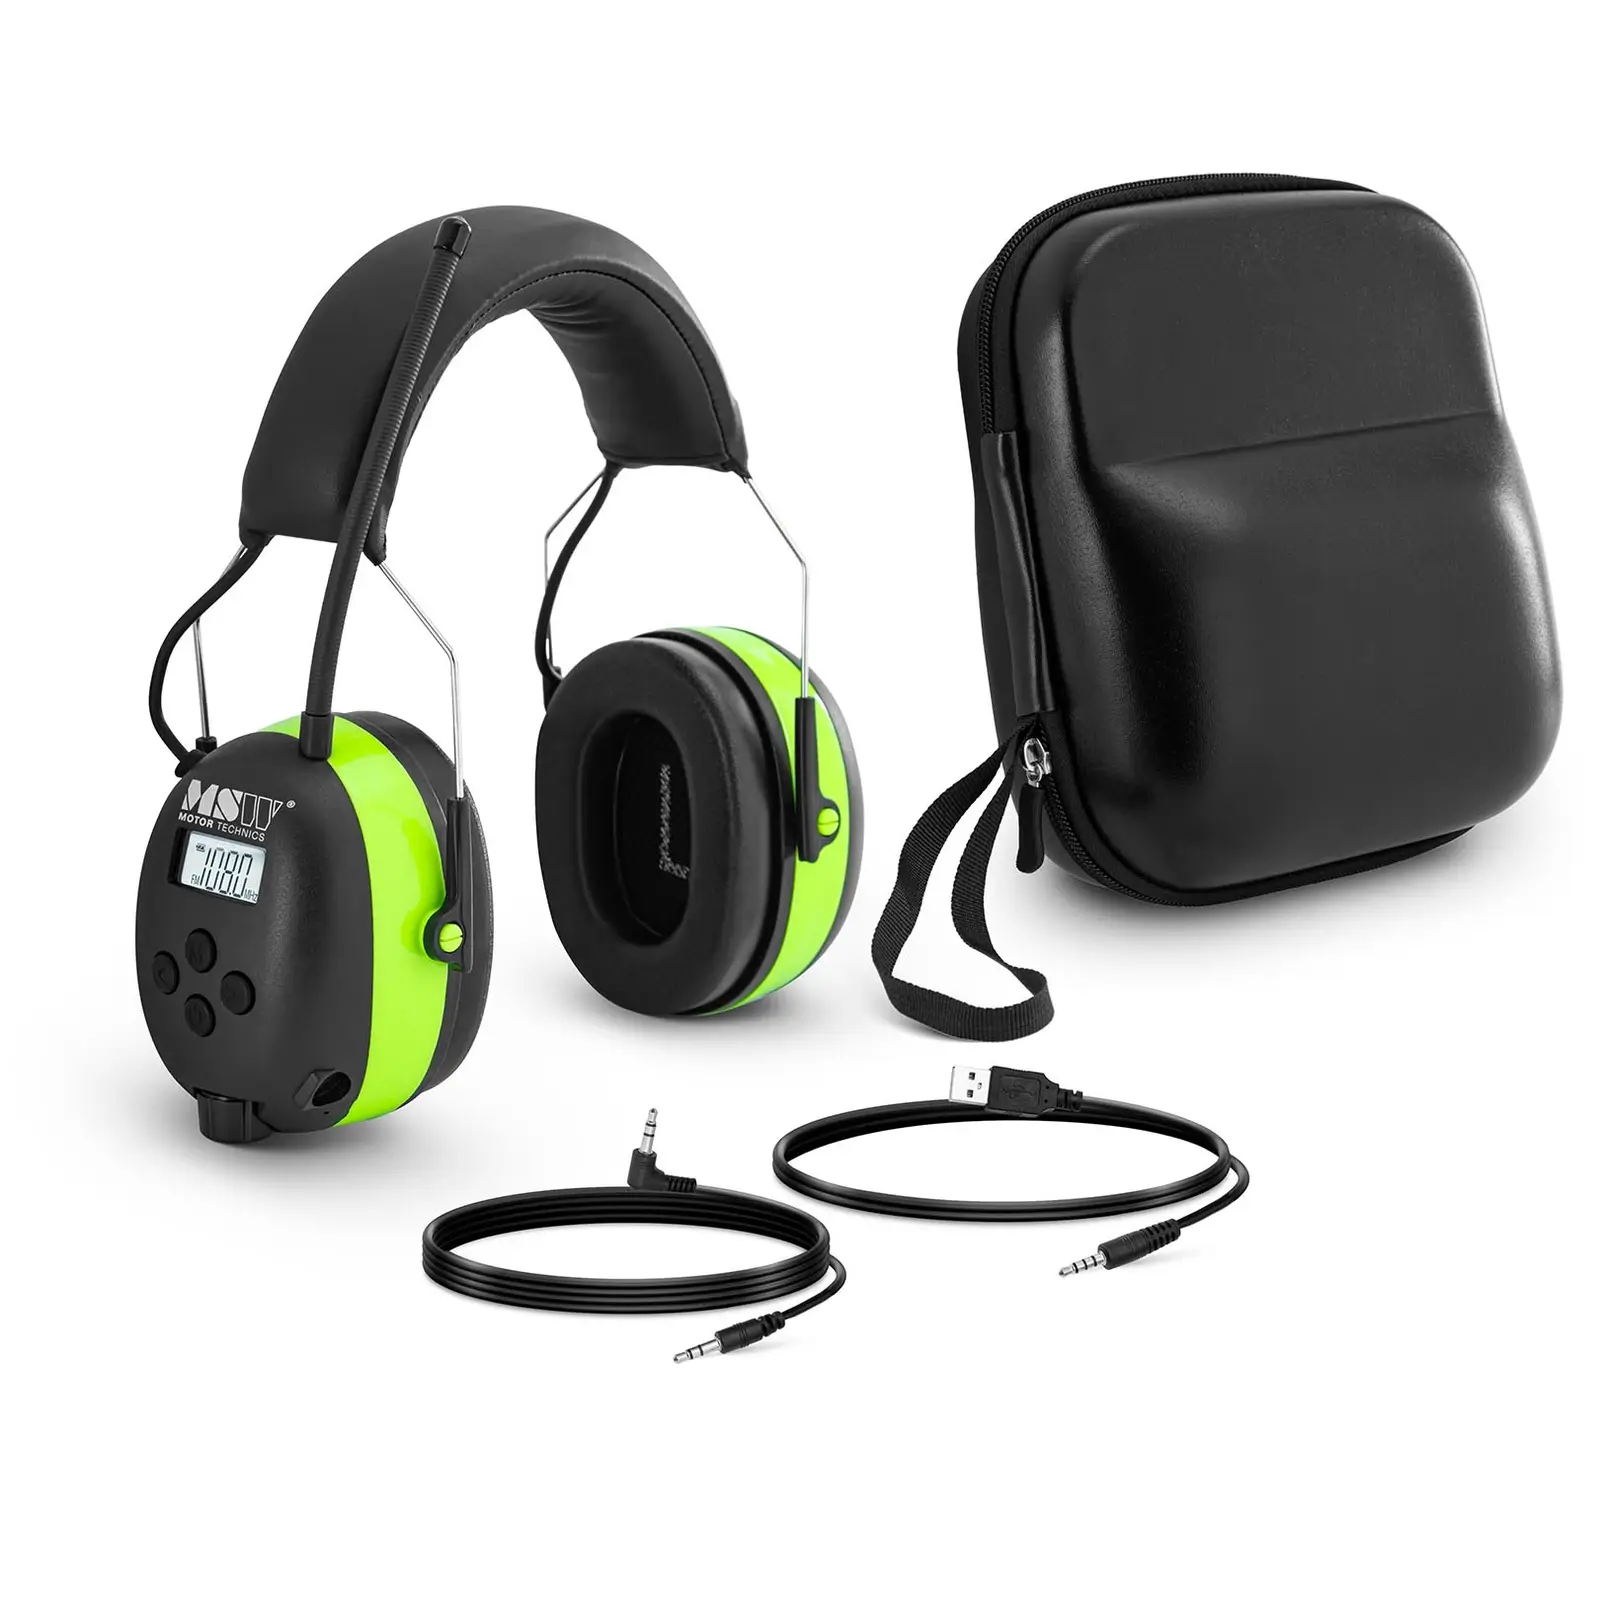 Hearing Protection with Bluetooth - Microphone - LCD Display - Rechargeable Battery - Green